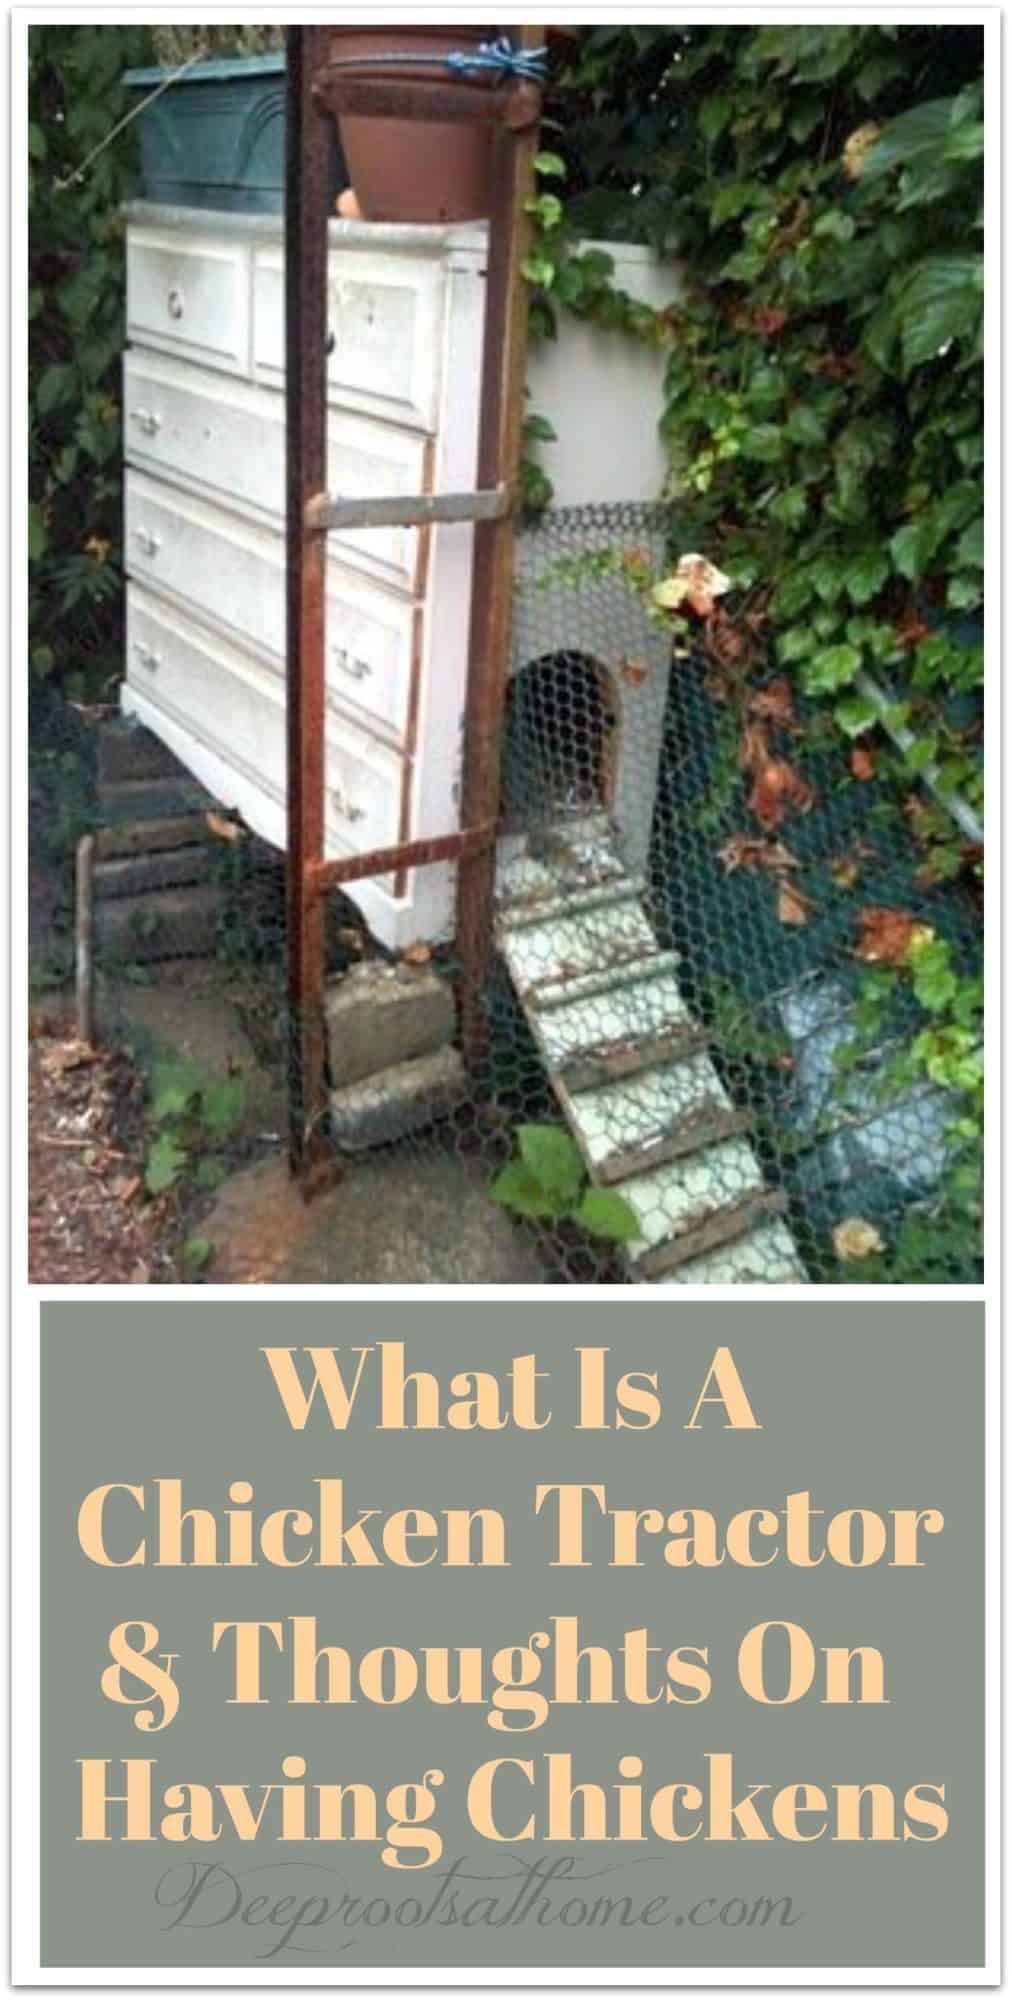 What Is A Chicken Tractor and Thoughts On Having Chickens. A cabinet as a chicken home